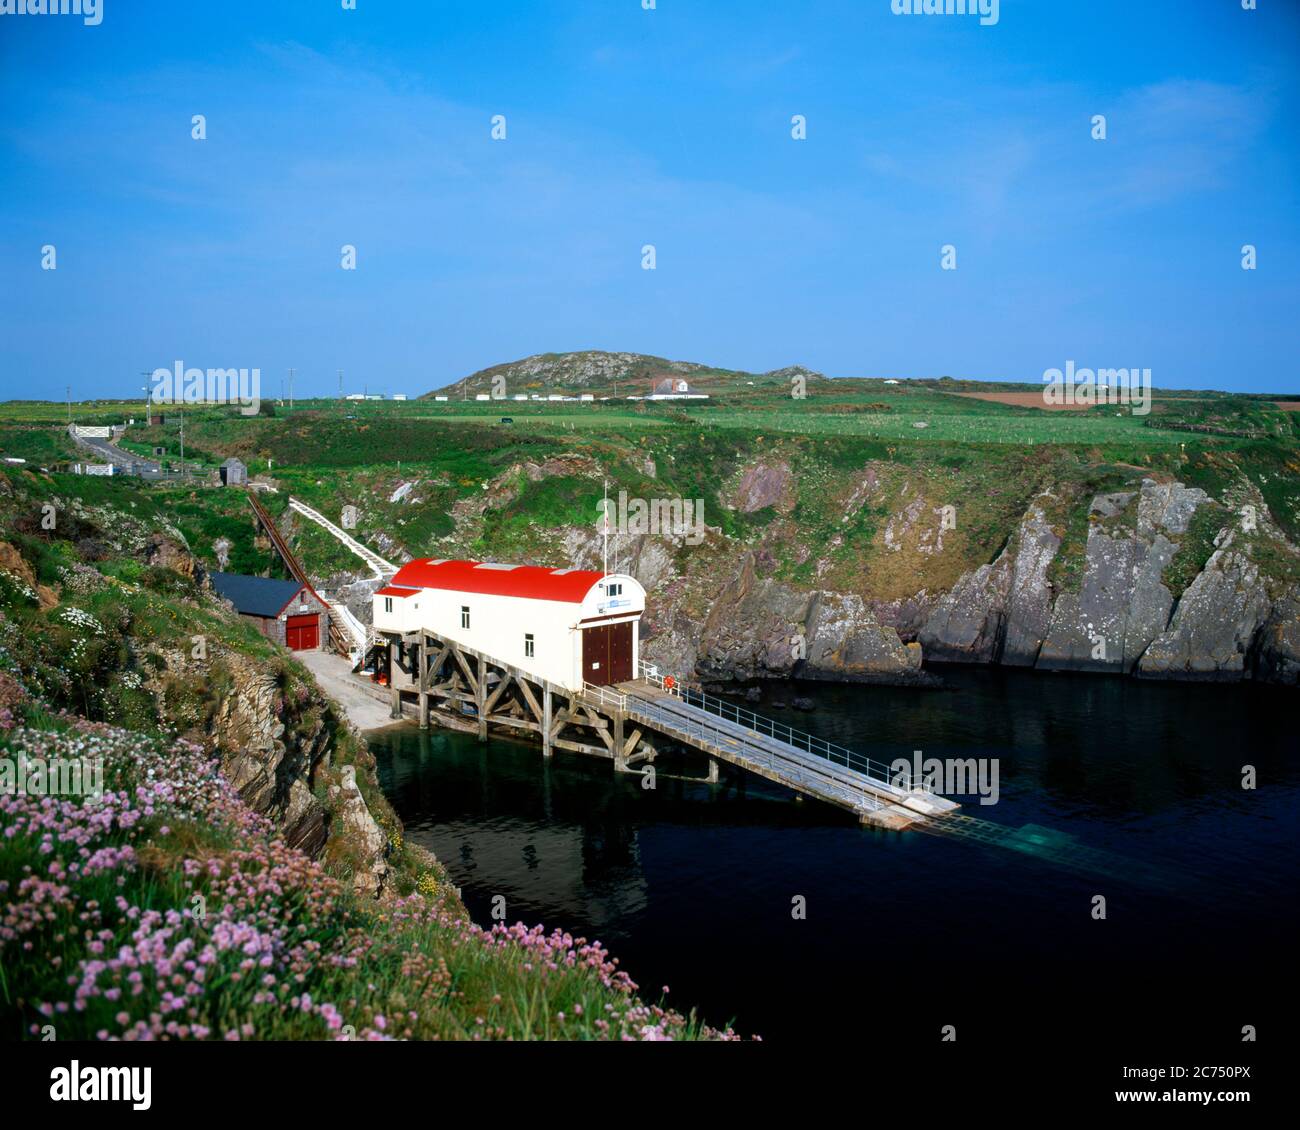 St Justinian’s lifeboat station, St David's, Pembrokeshire, West Wales. Stock Photo